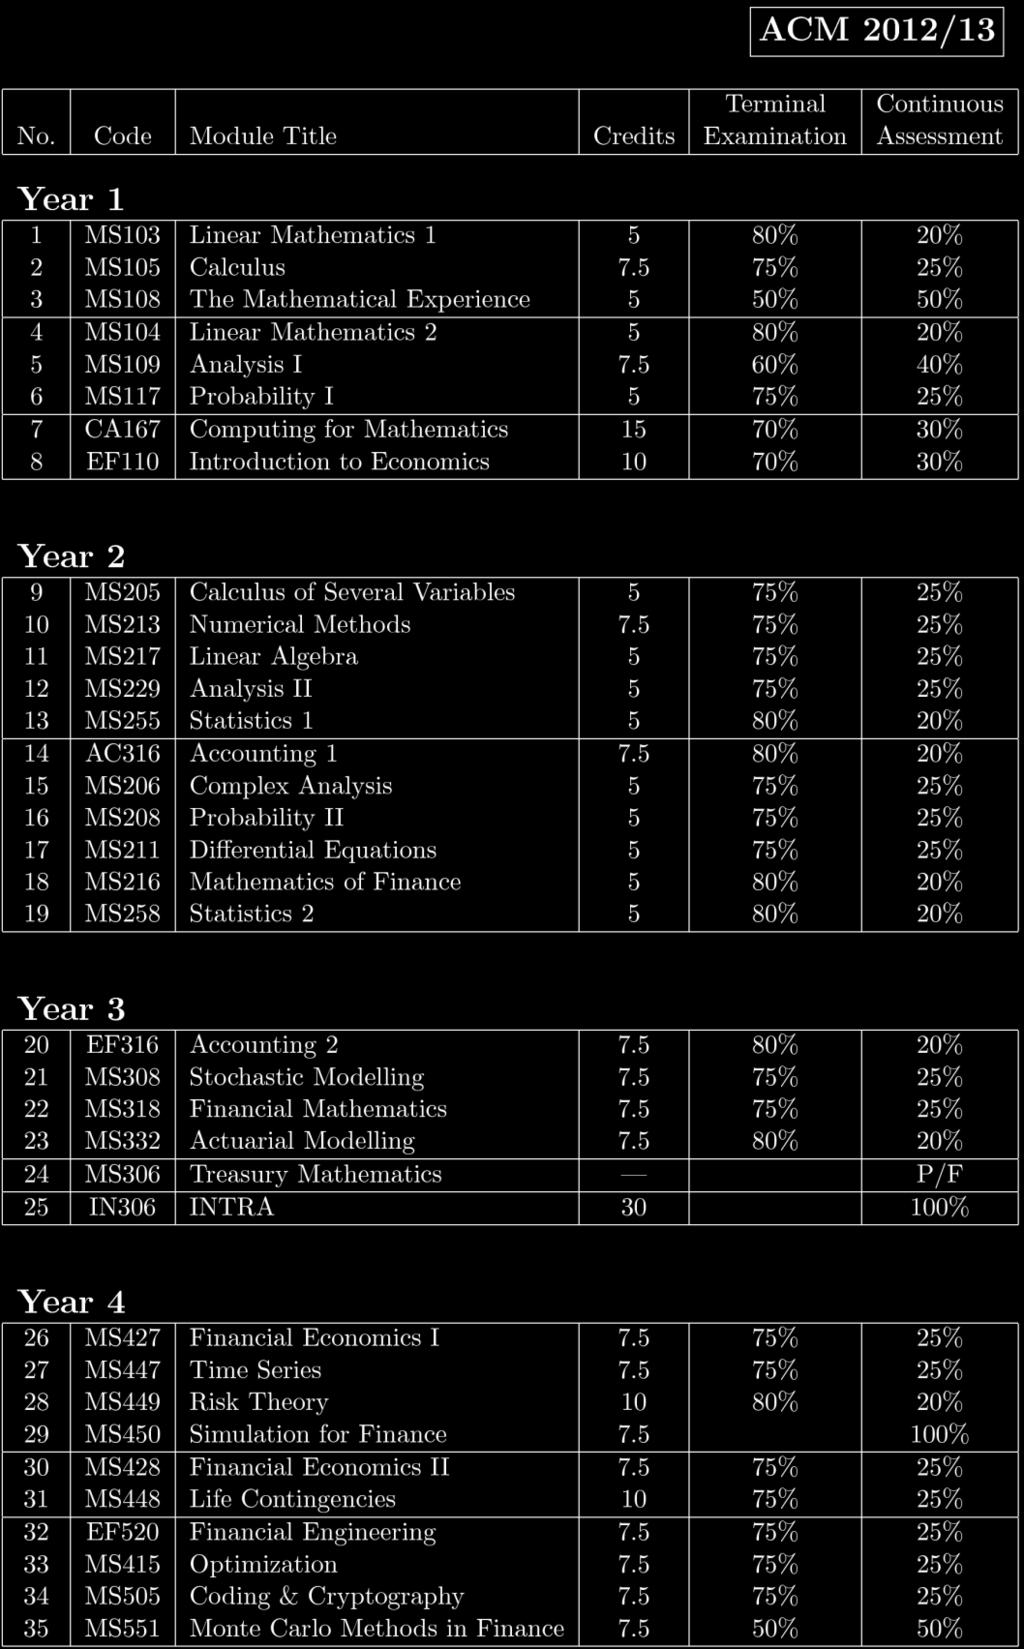 Table 6: 2012/13 Modules